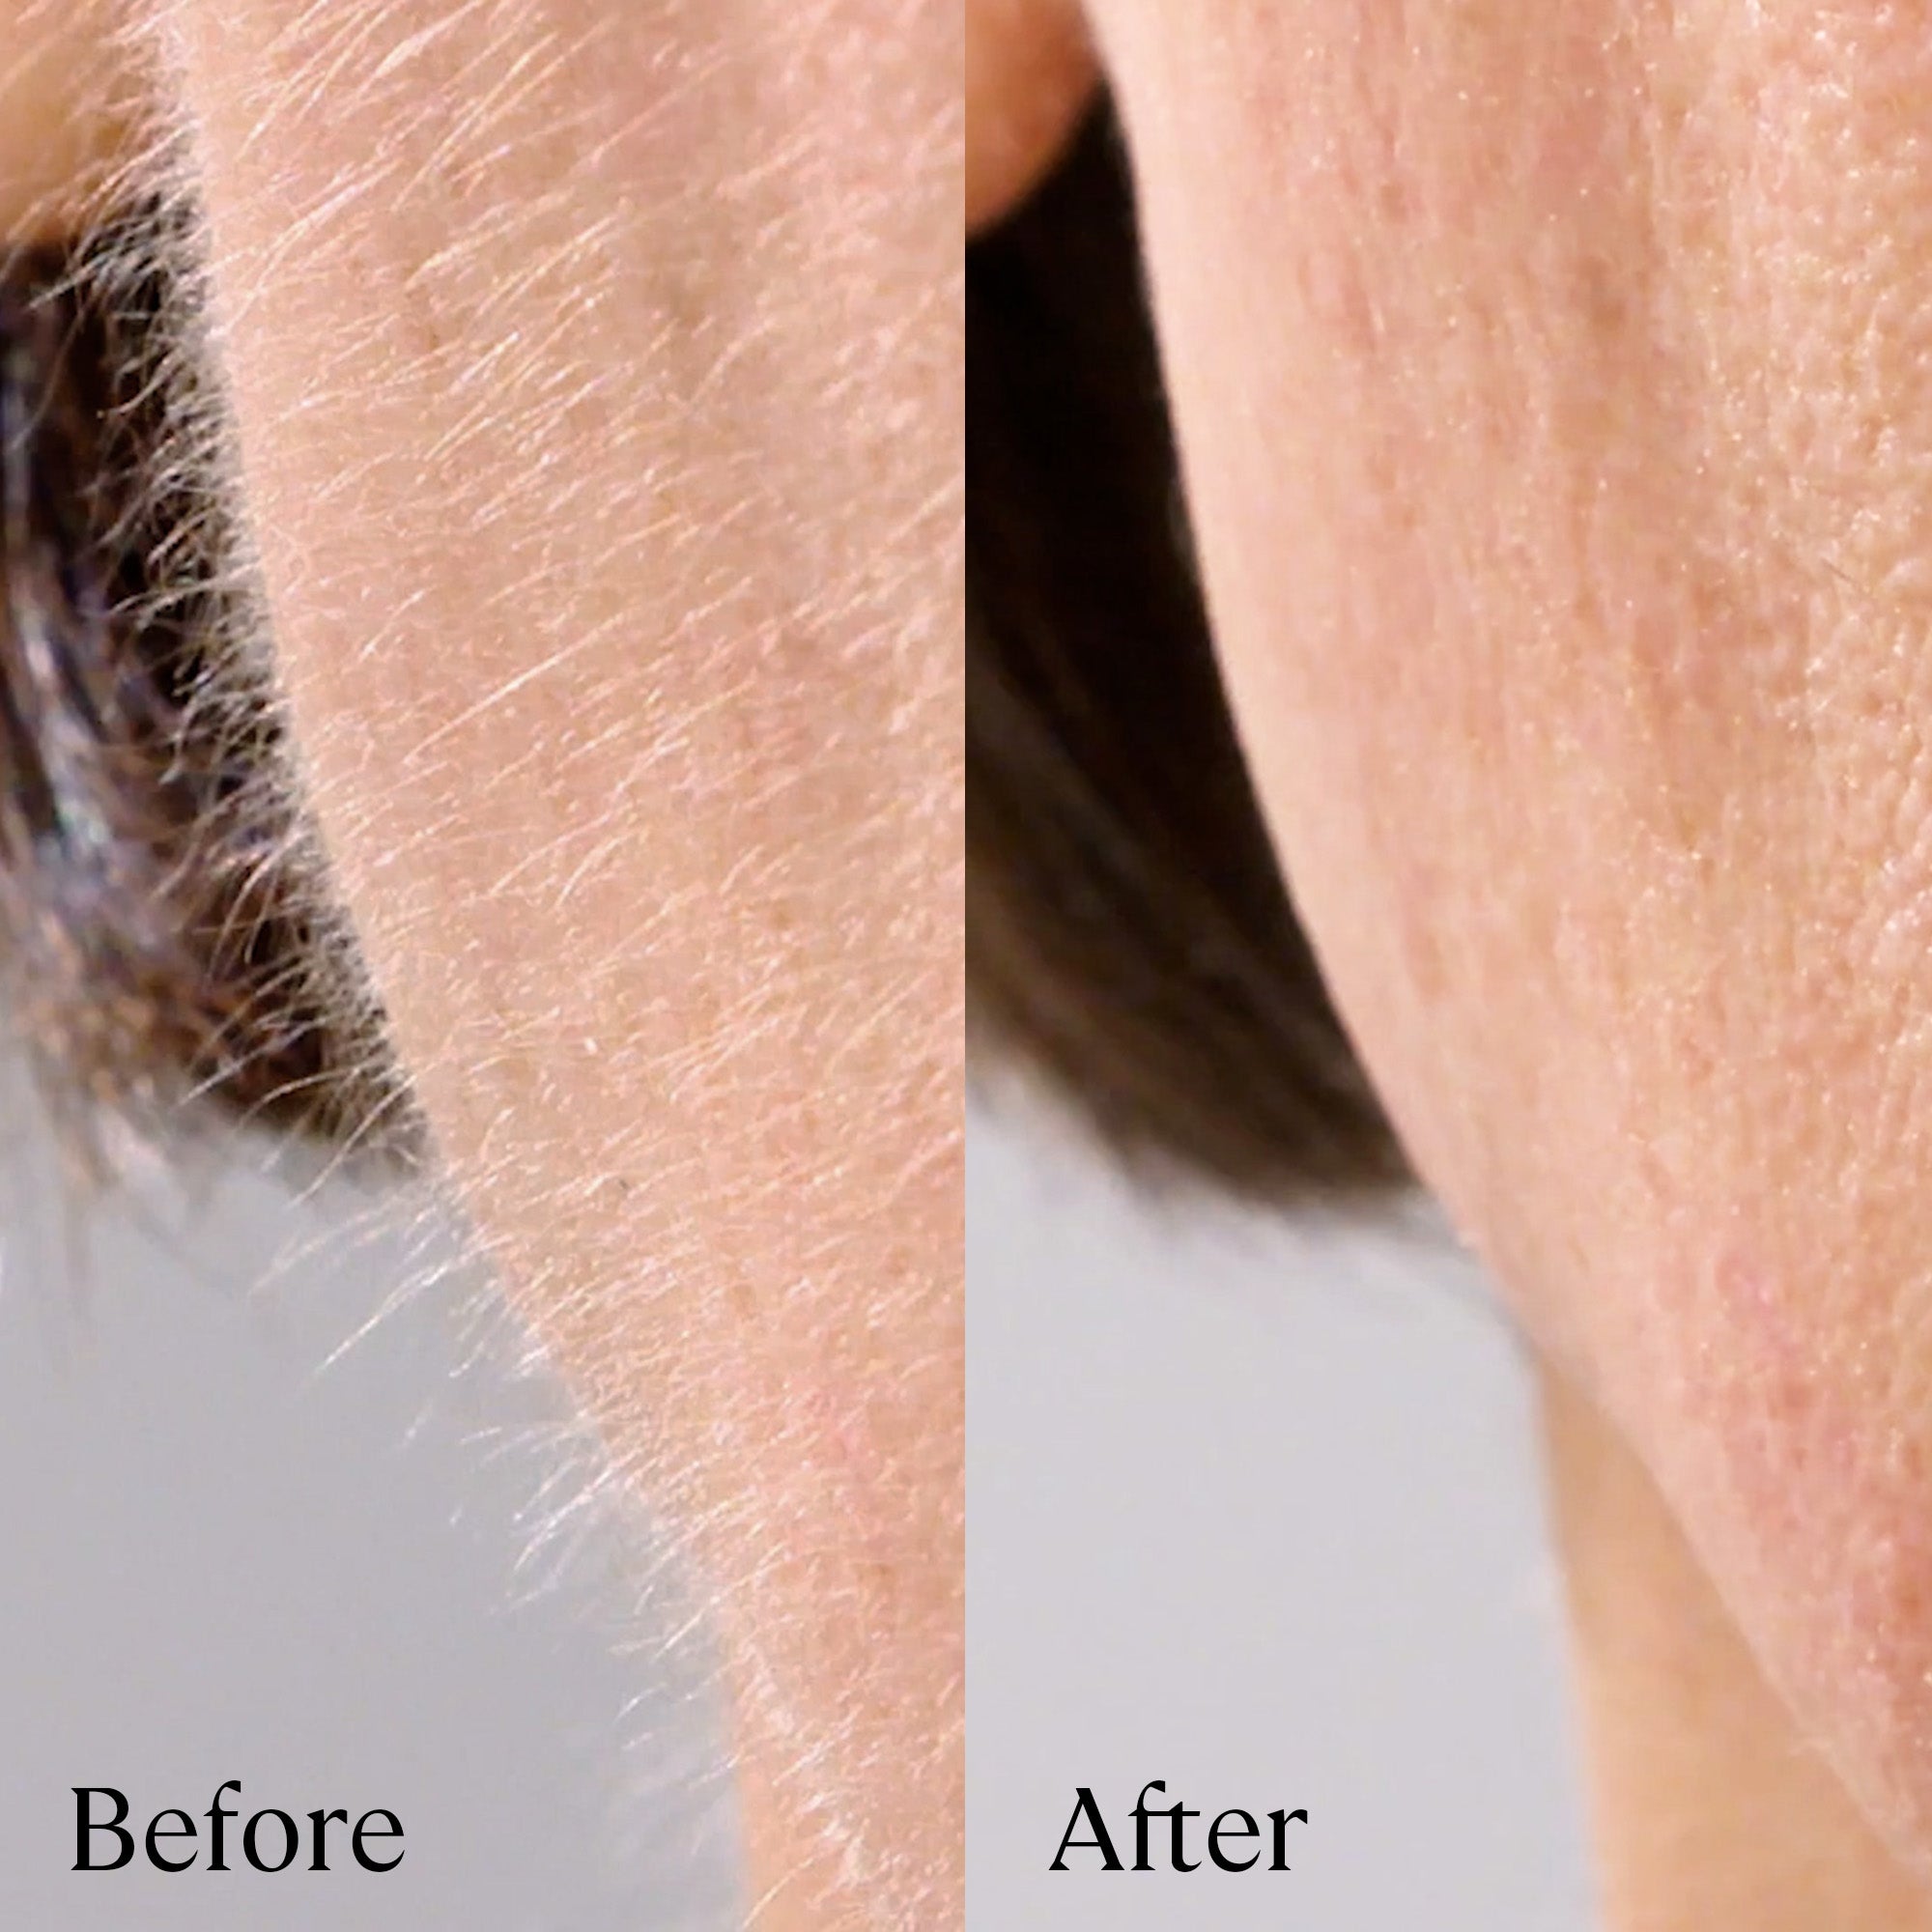 Close-up comparison of skin before and after hair removal.